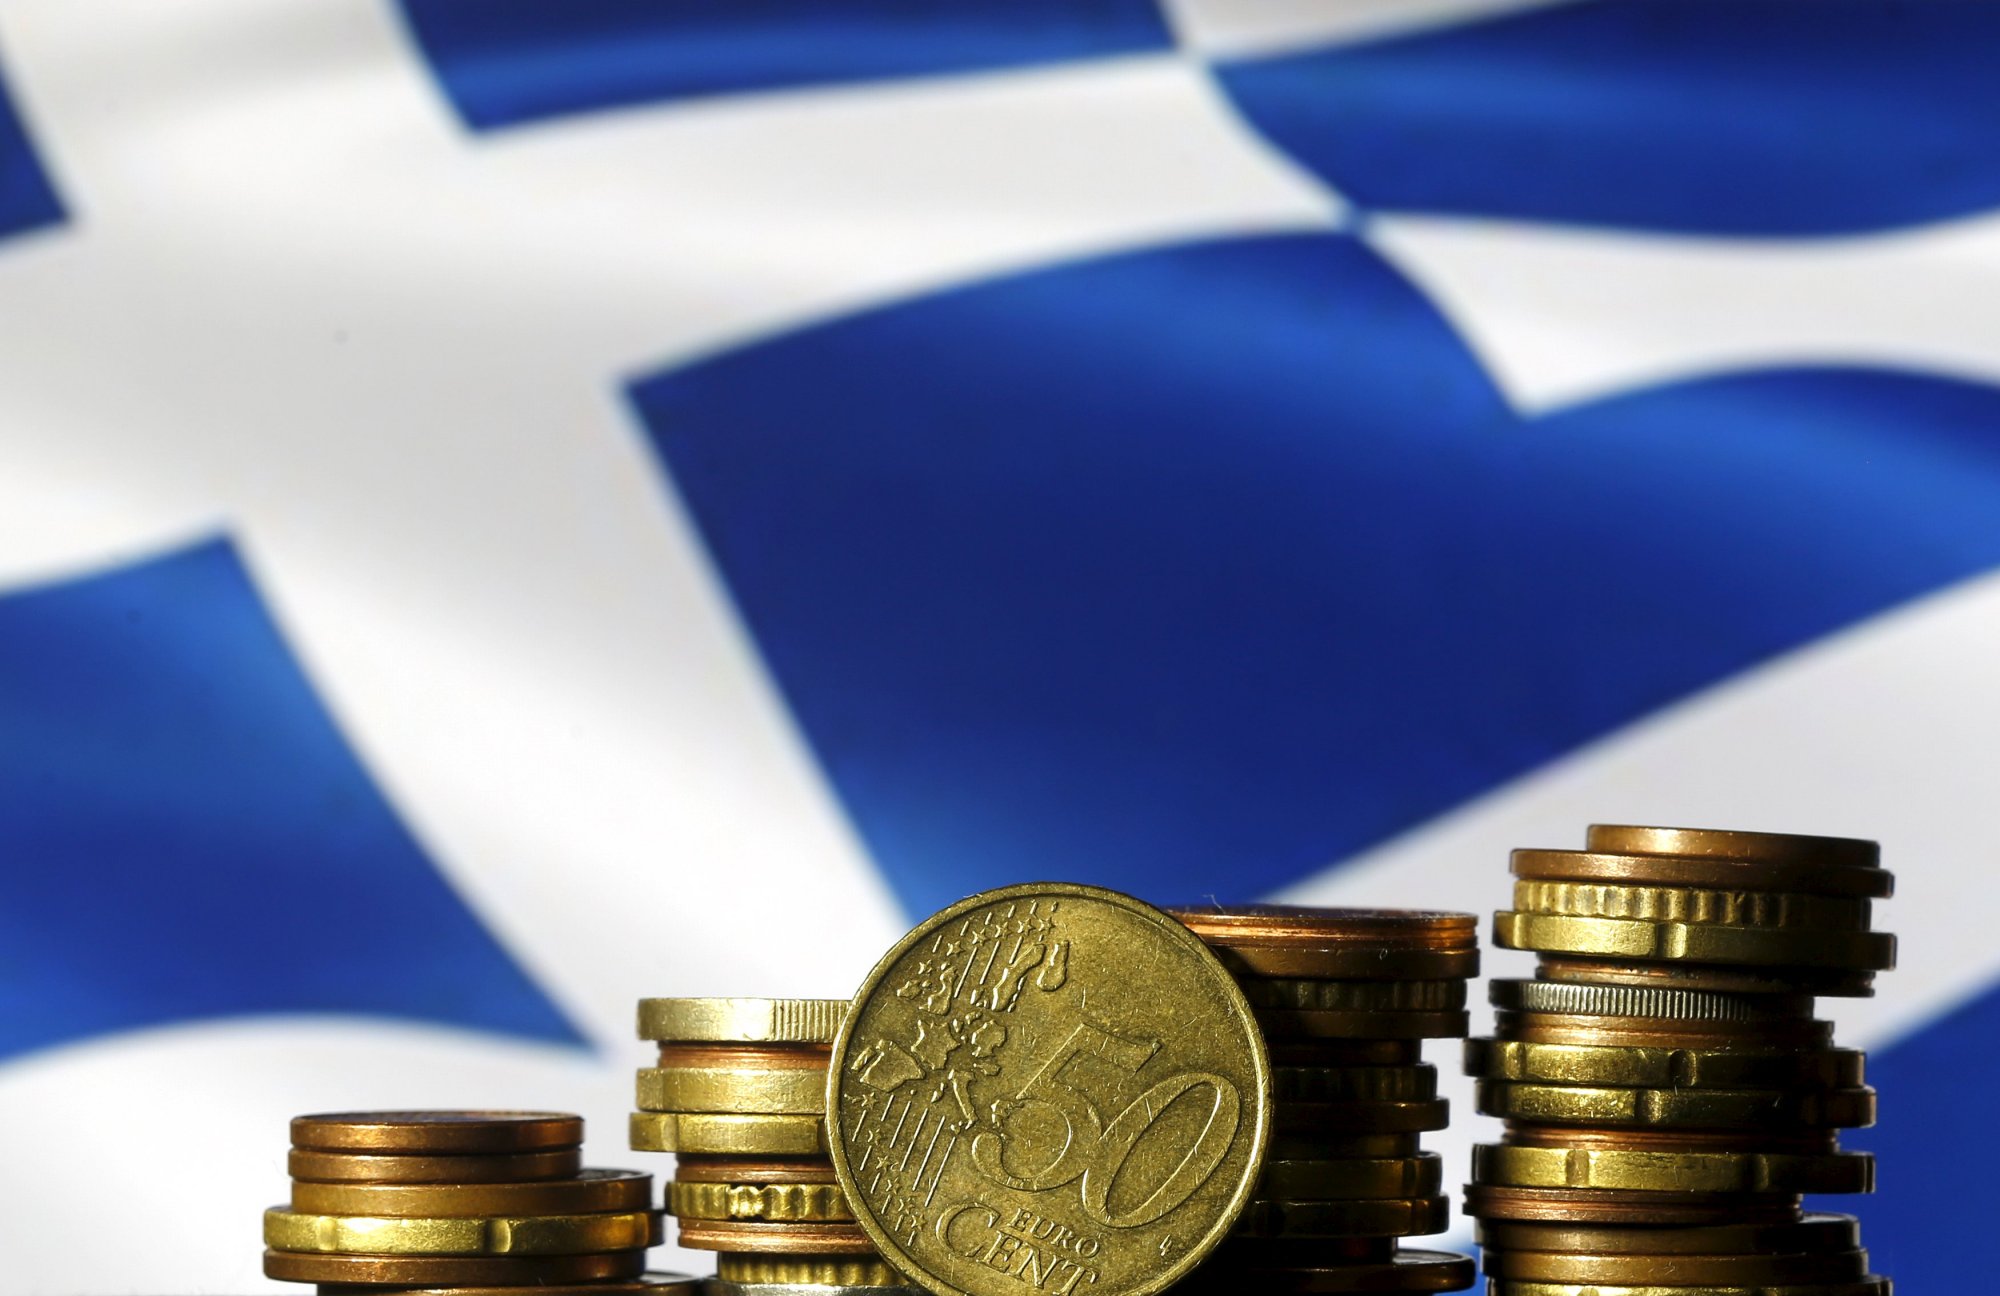 Reuters: Greek Economy Surges After Decade of Pain